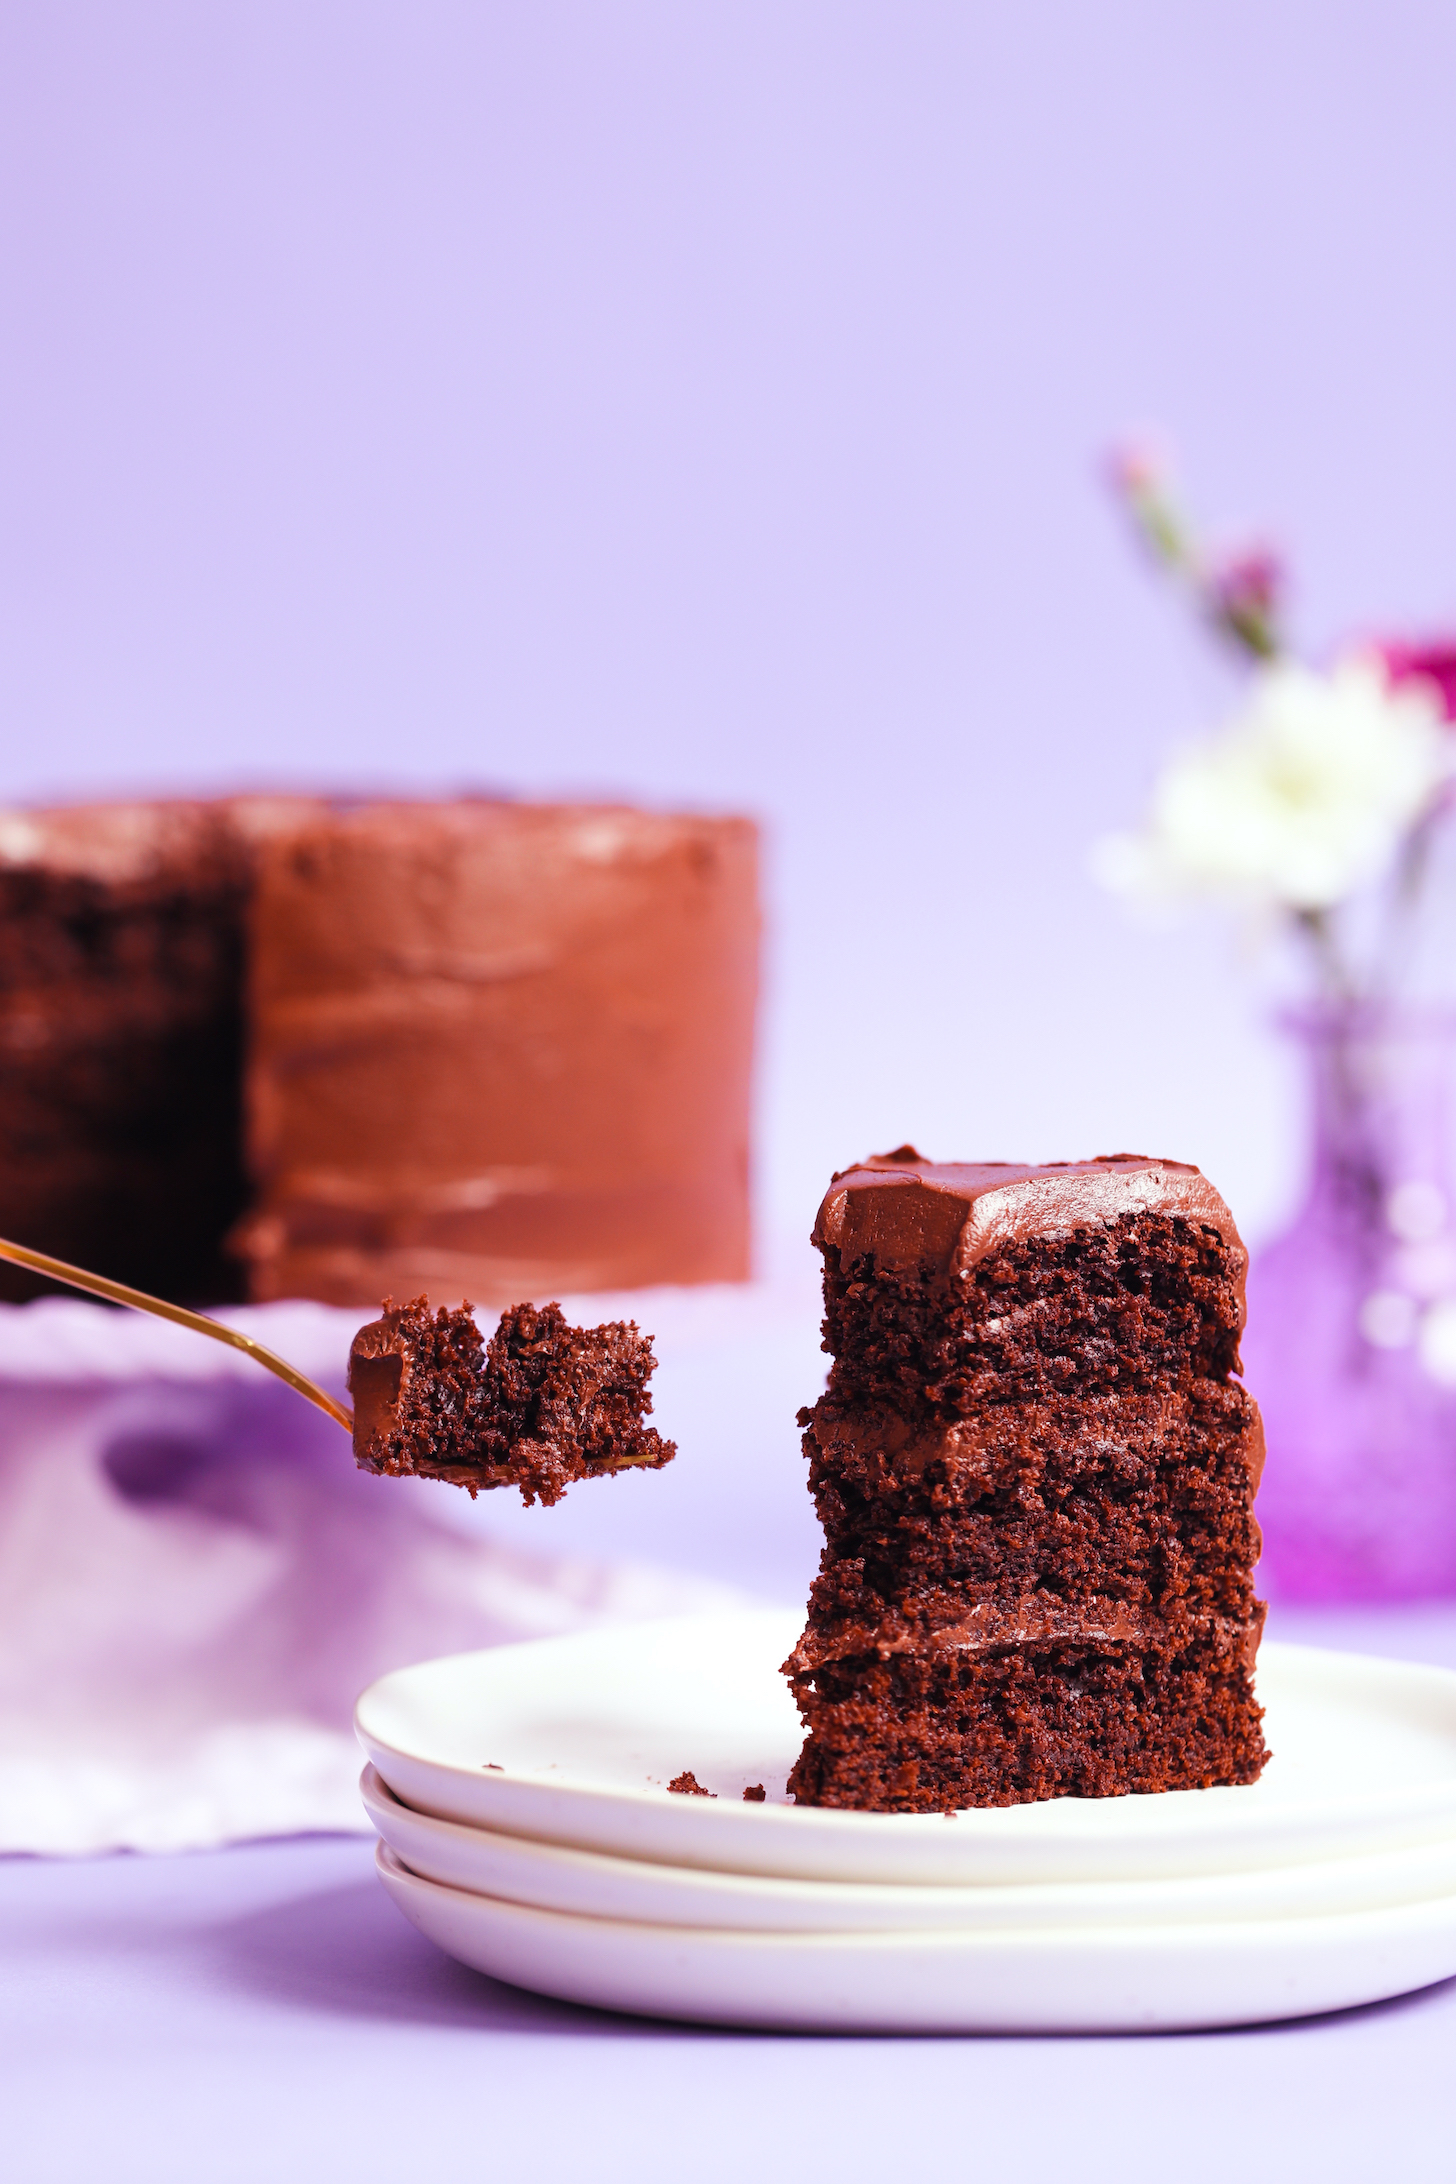 Bite of gluten-free chocolate cake resting on a fork next to a slice of cake